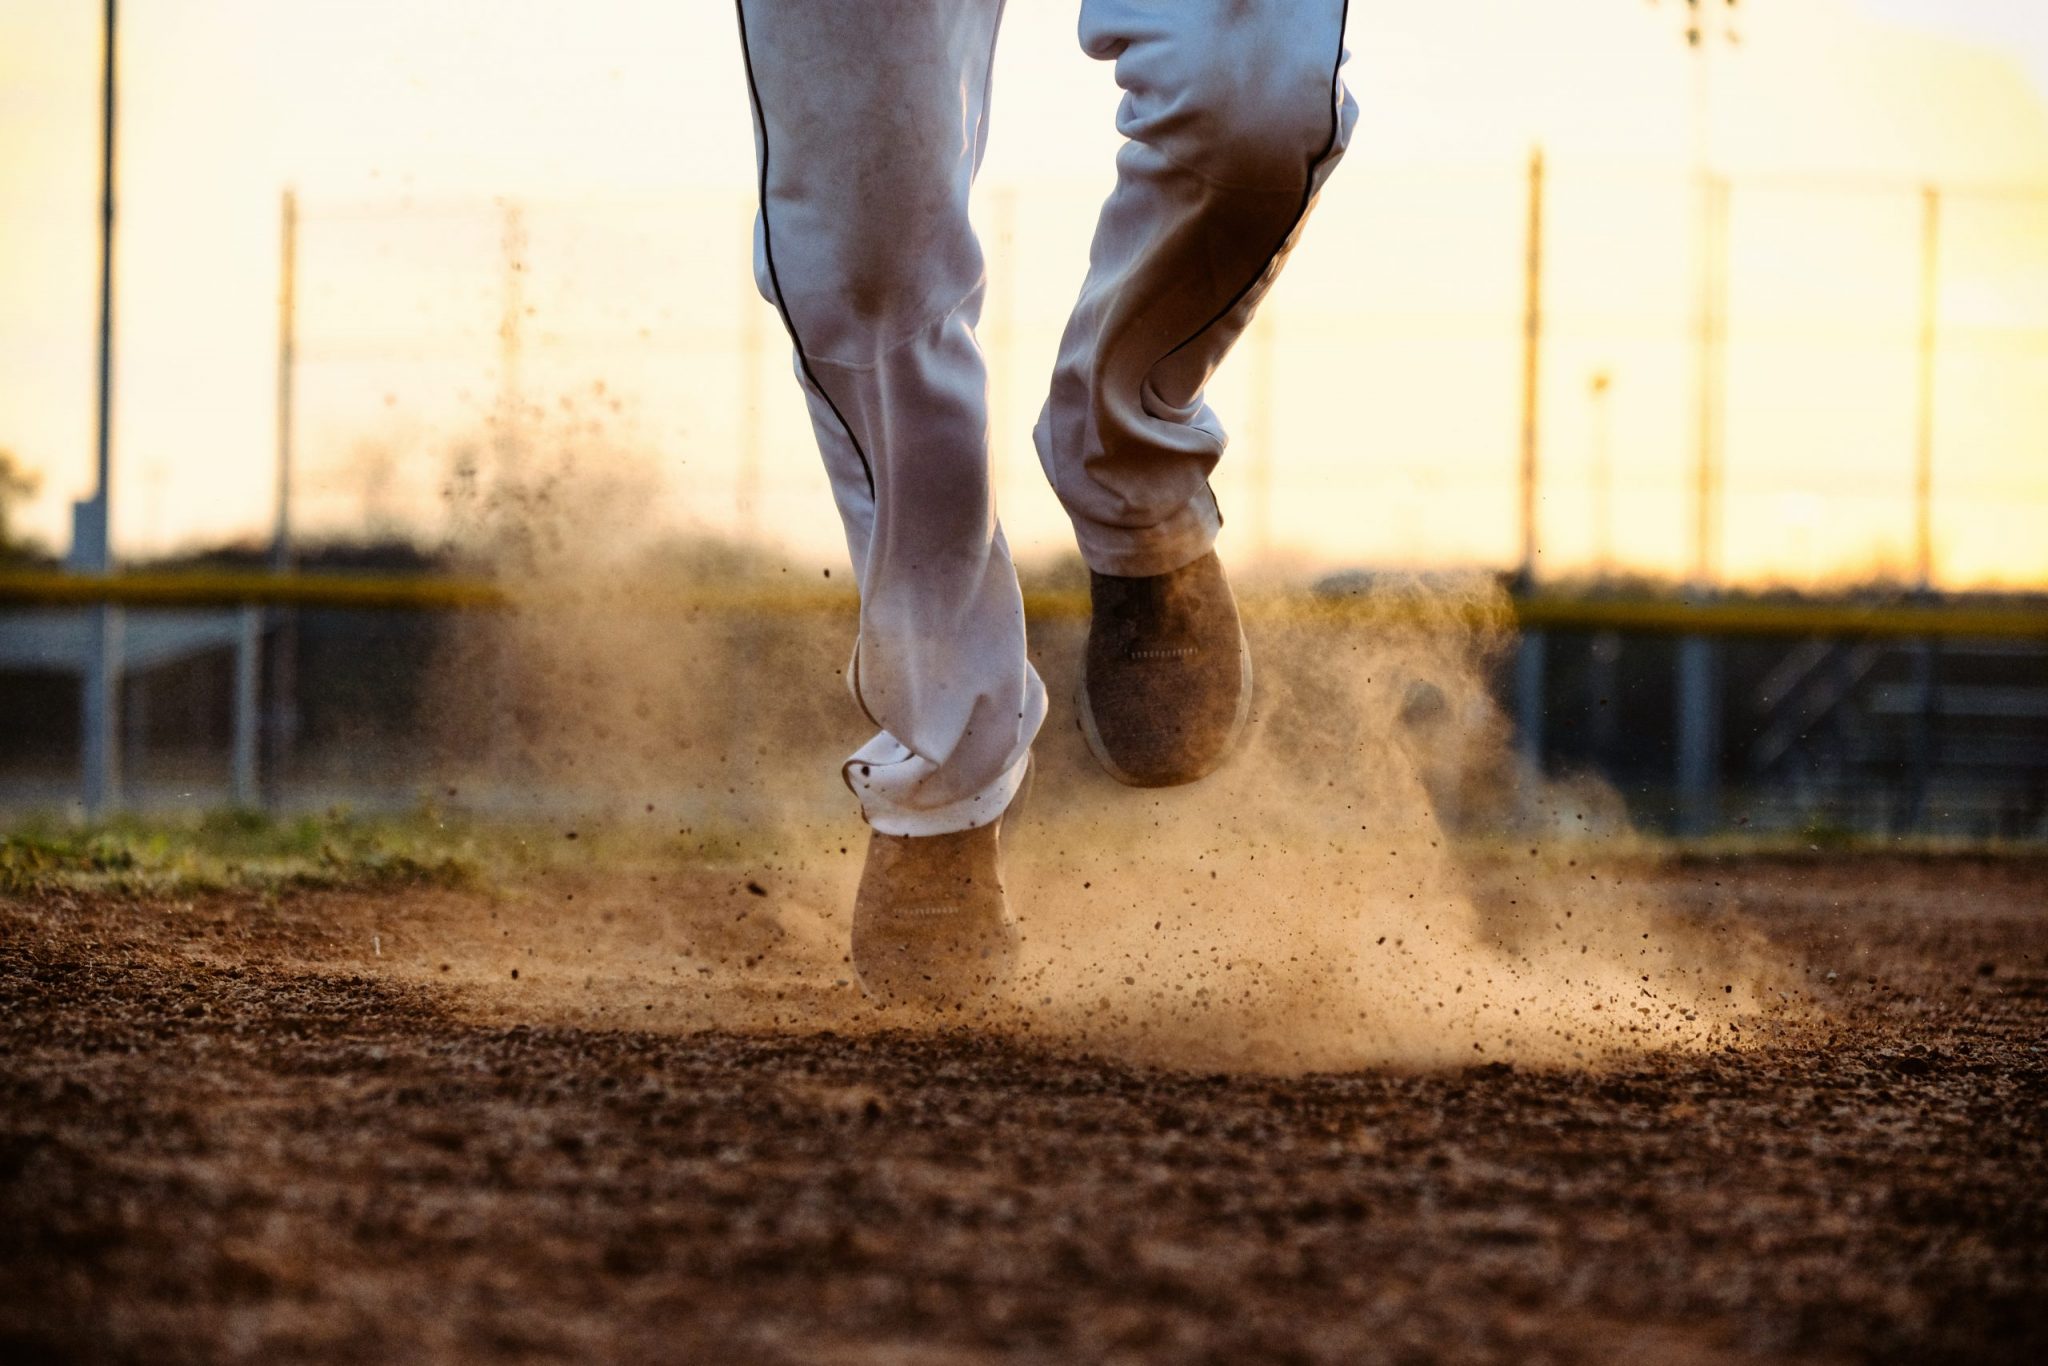 Baseball player feet running to base on field, dirt and dust moving from action of athlete